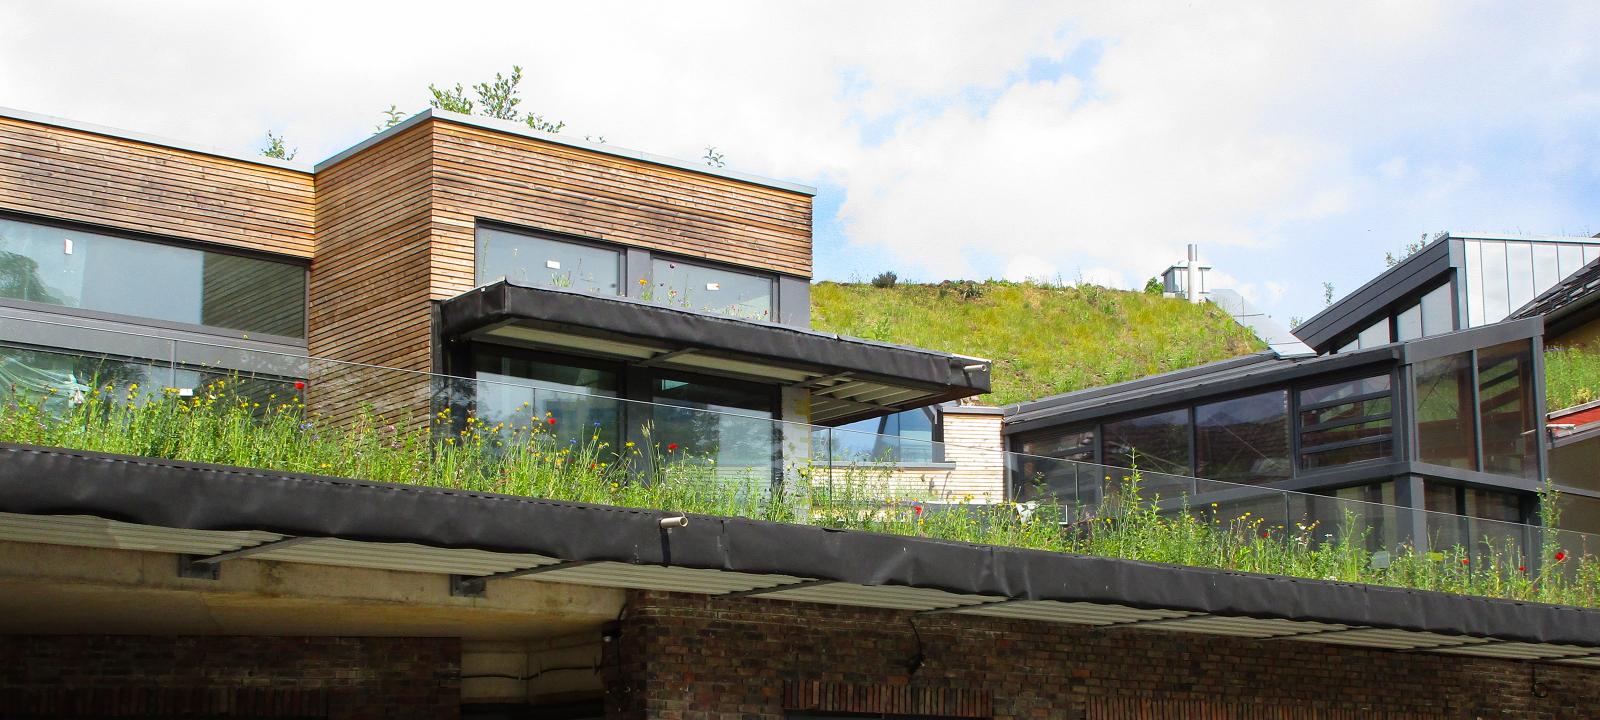 Pitched green roof and a meadow on a flat roof